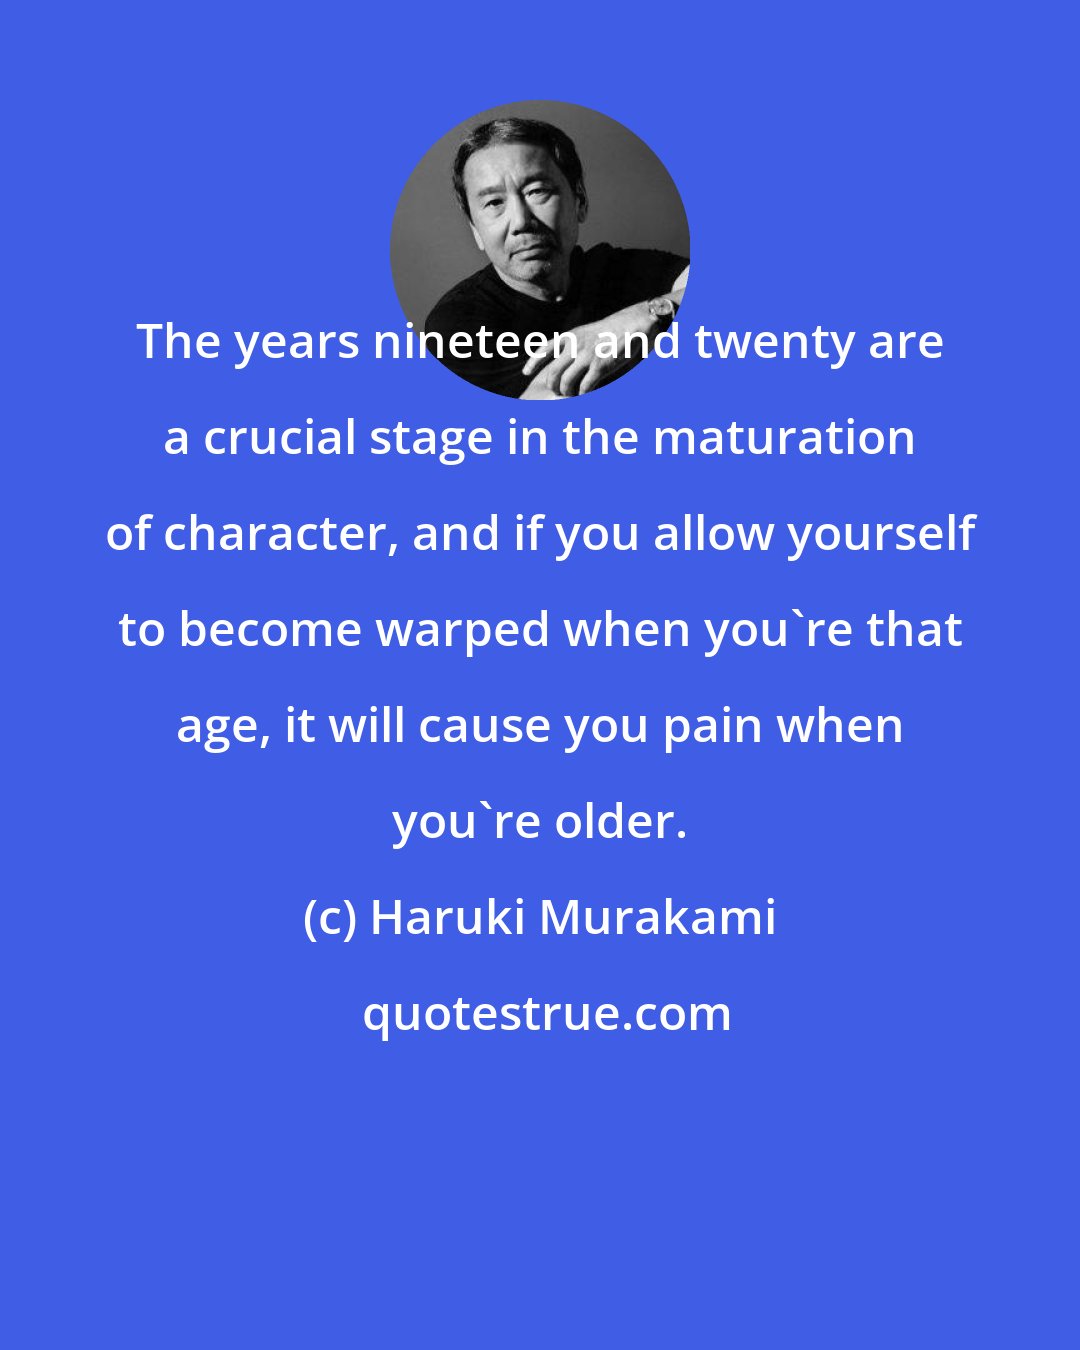 Haruki Murakami: The years nineteen and twenty are a crucial stage in the maturation of character, and if you allow yourself to become warped when you're that age, it will cause you pain when you're older.